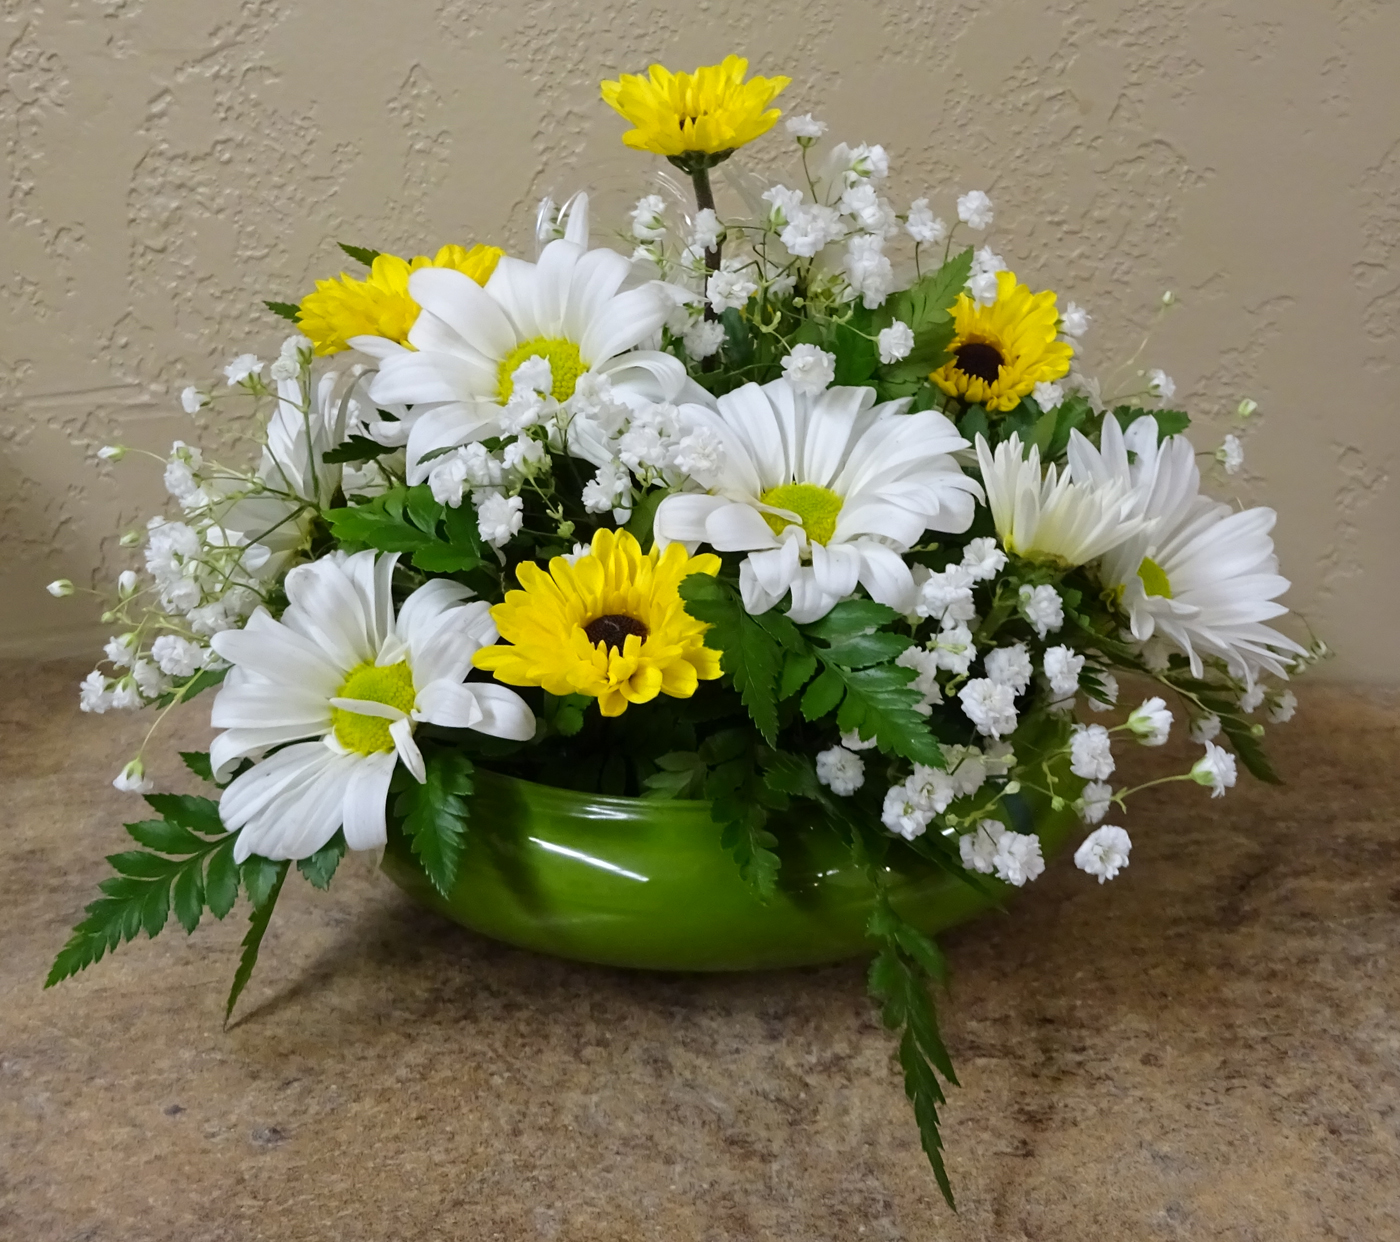 Flowers from The Silverleaf Staff